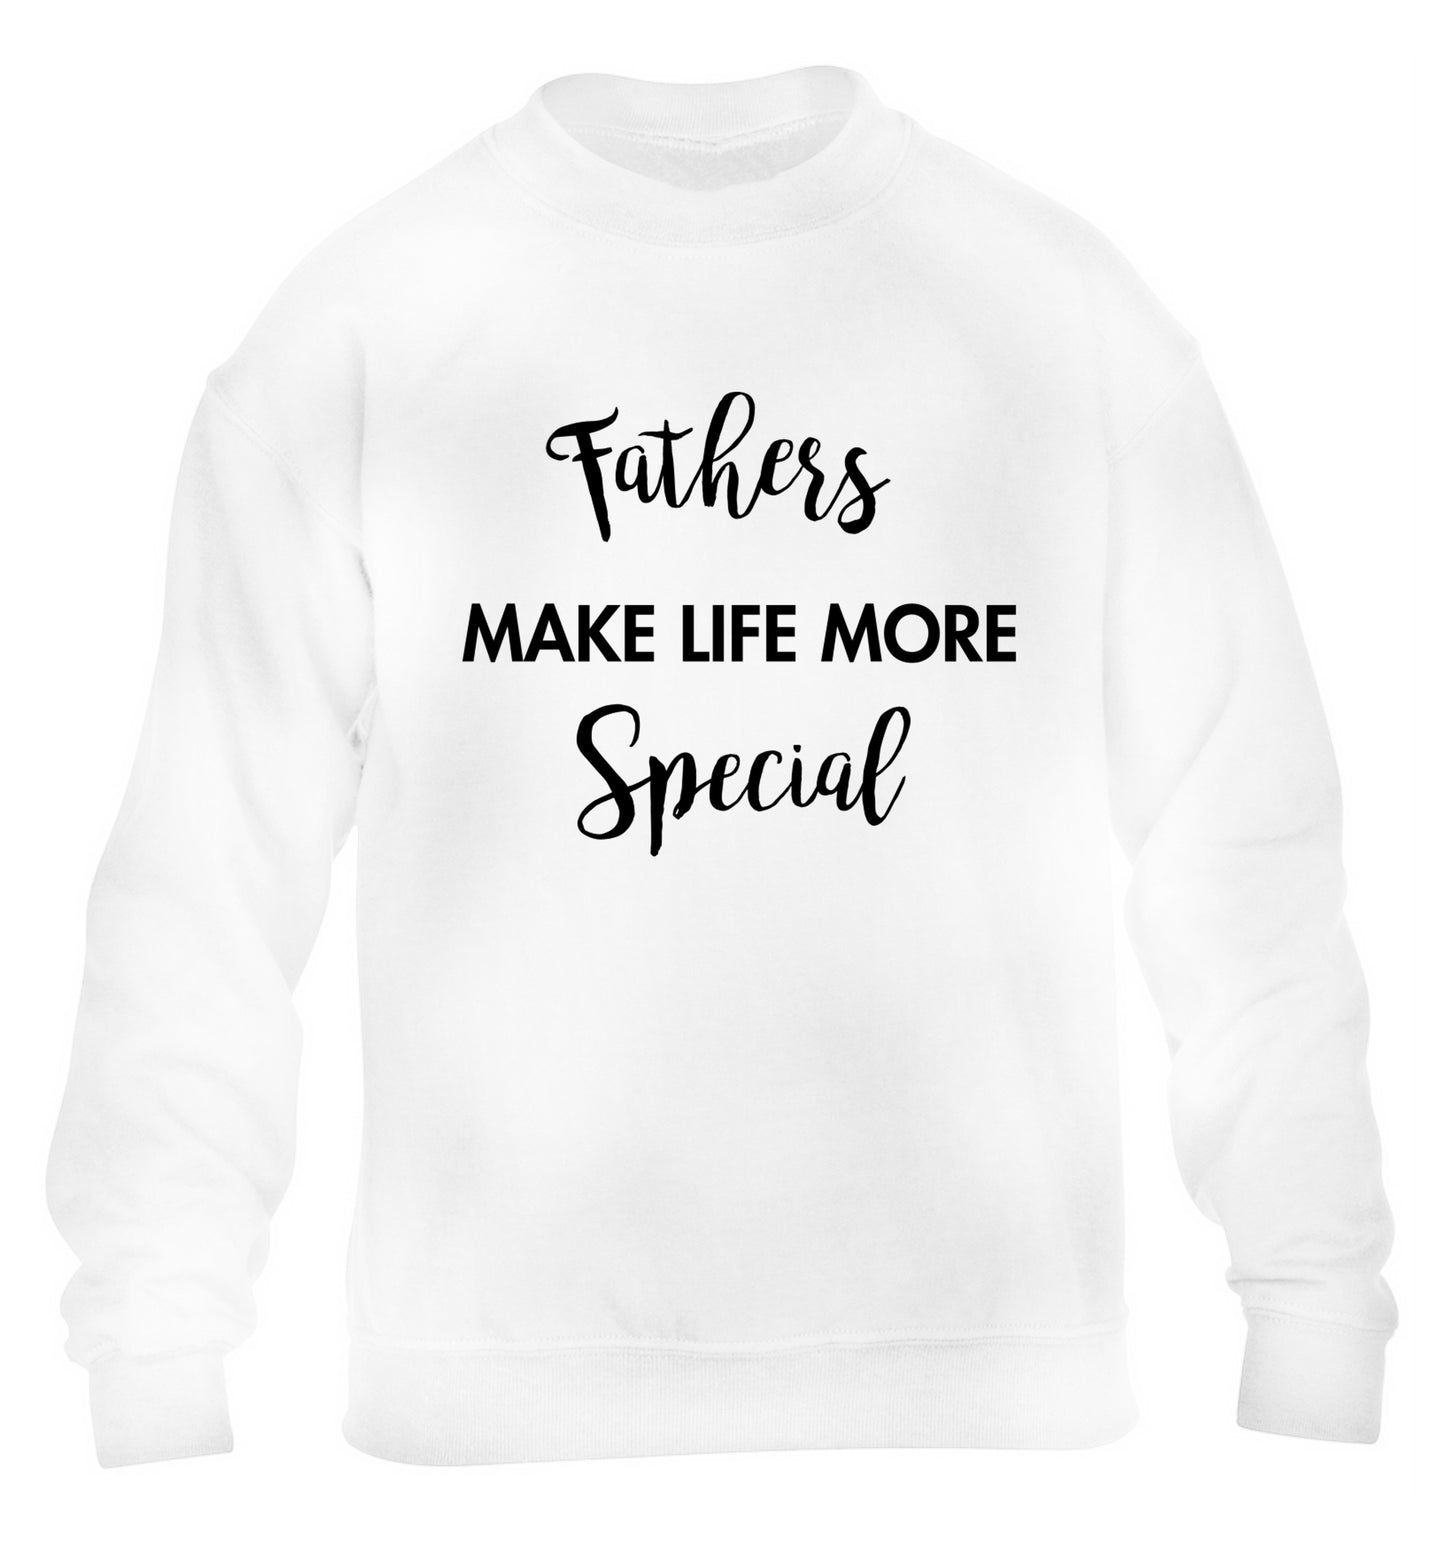 Fathers make life more special children's white sweater 12-14 Years